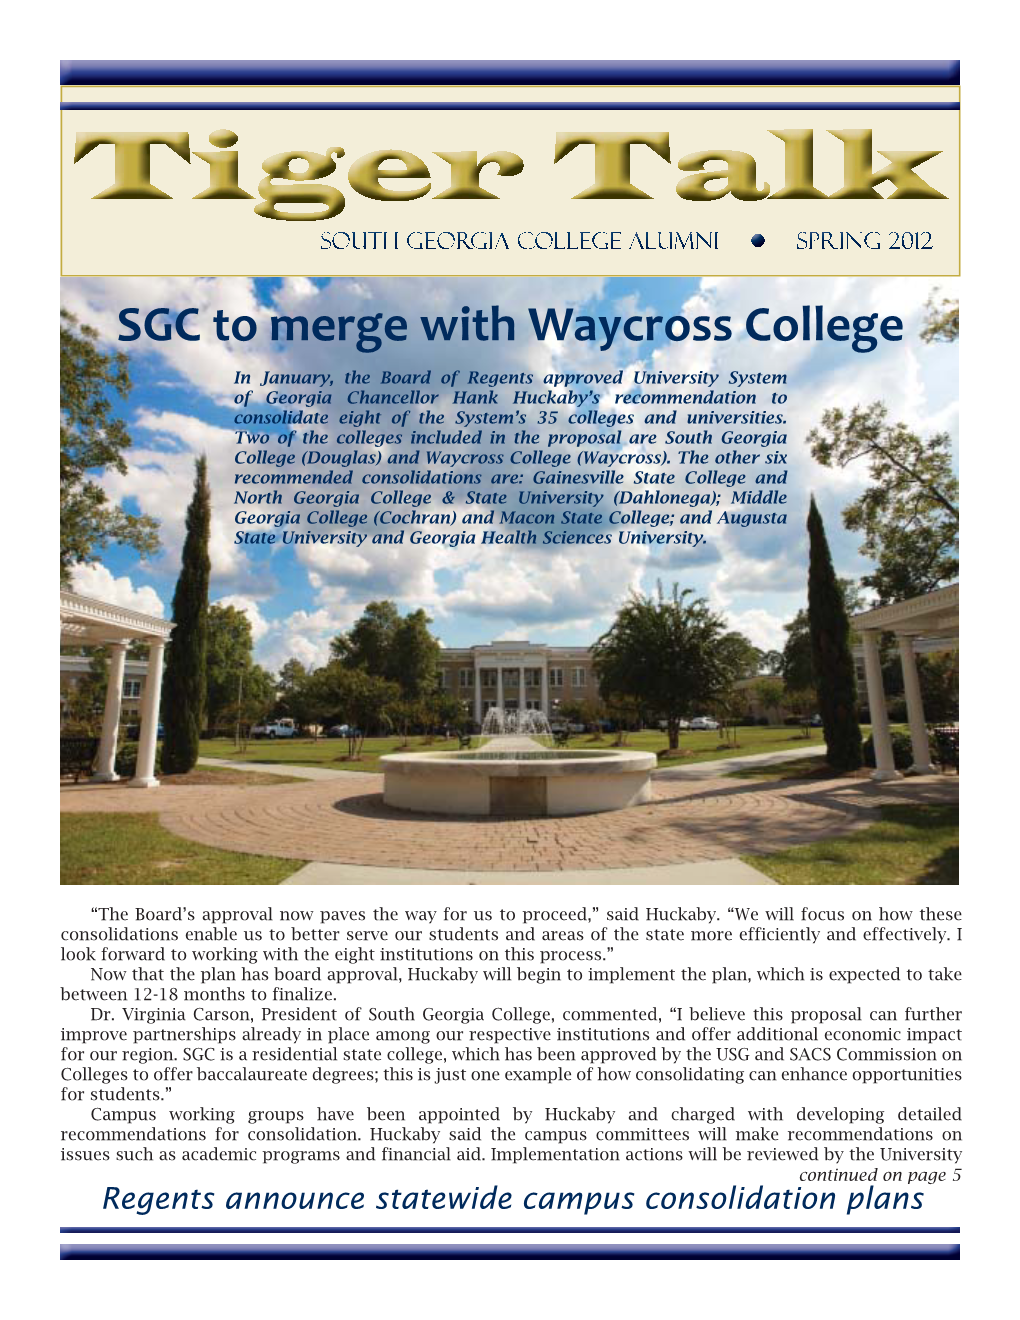 SGC to Merge with Waycross College